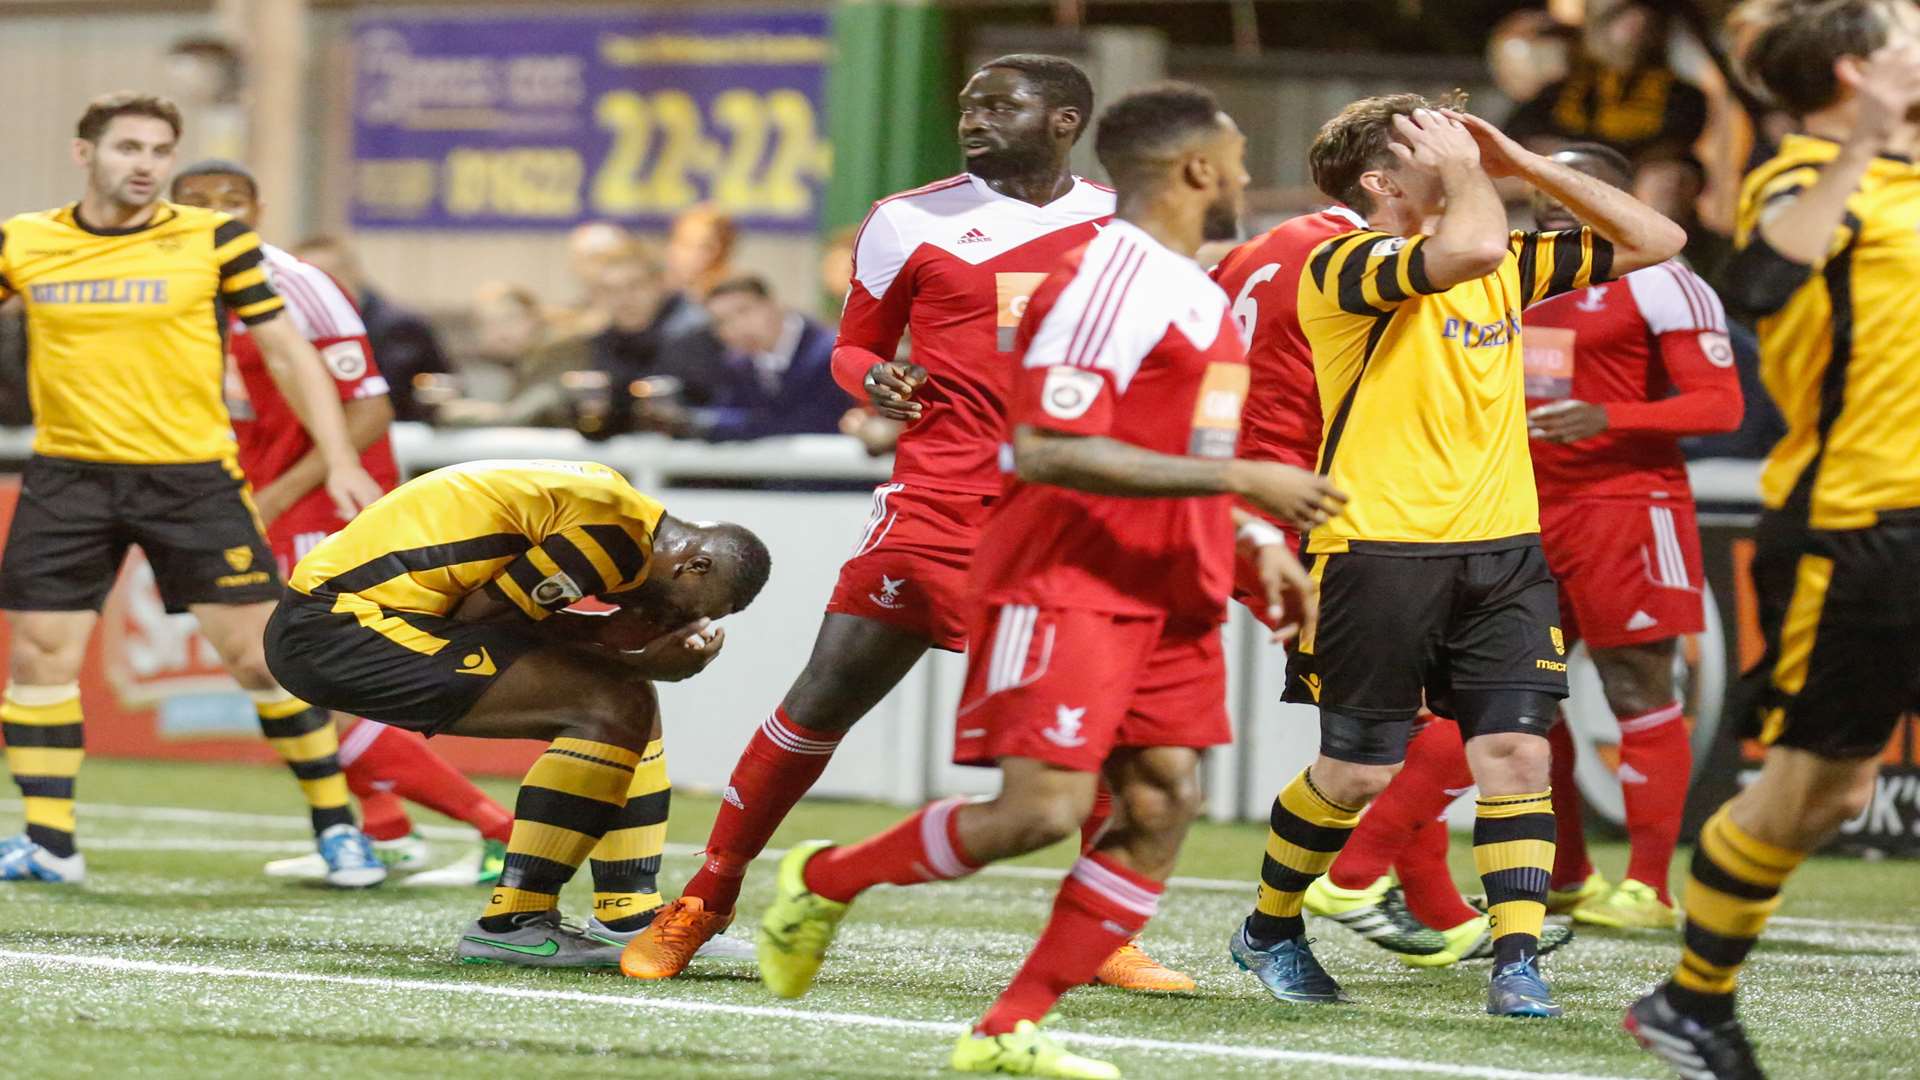 Frustration for Maidstone's Manny Parry as a good chance goes begging Picture: Matthew Walker